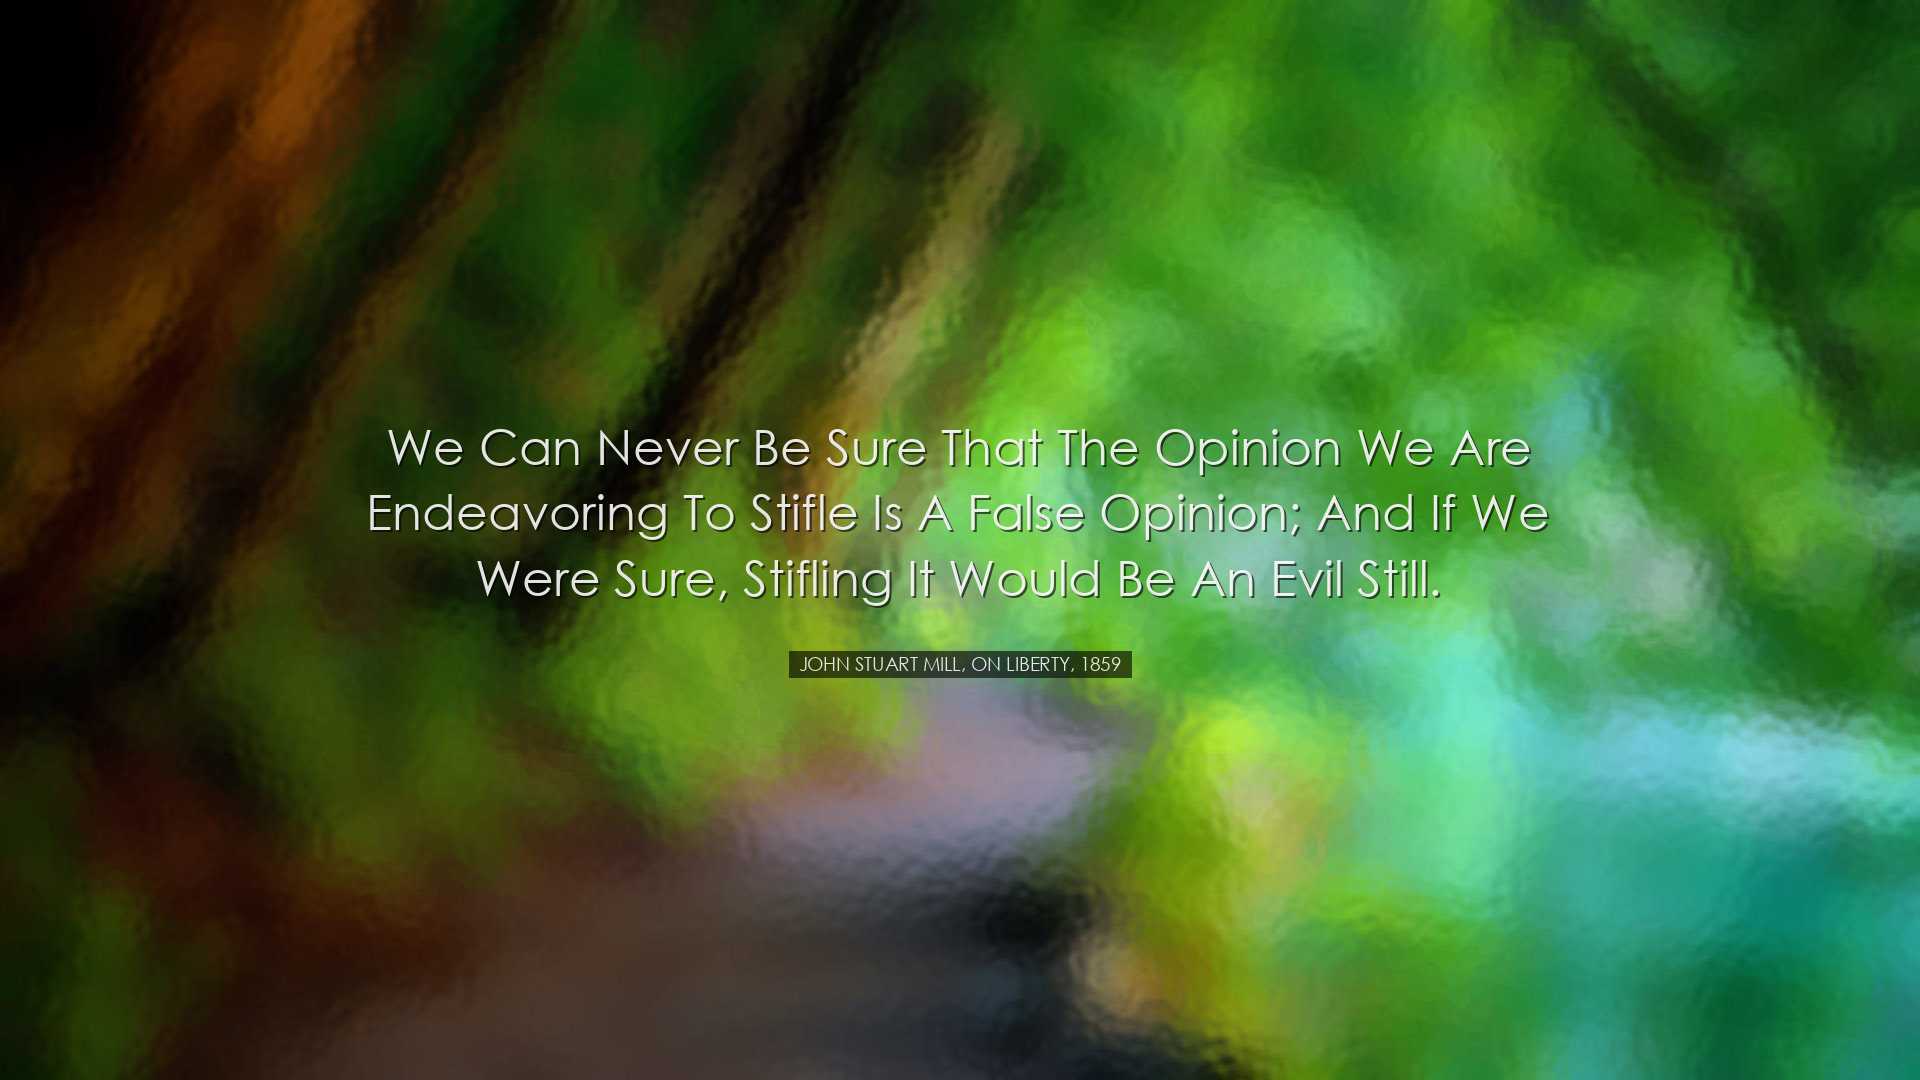 We can never be sure that the opinion we are endeavoring to stifle